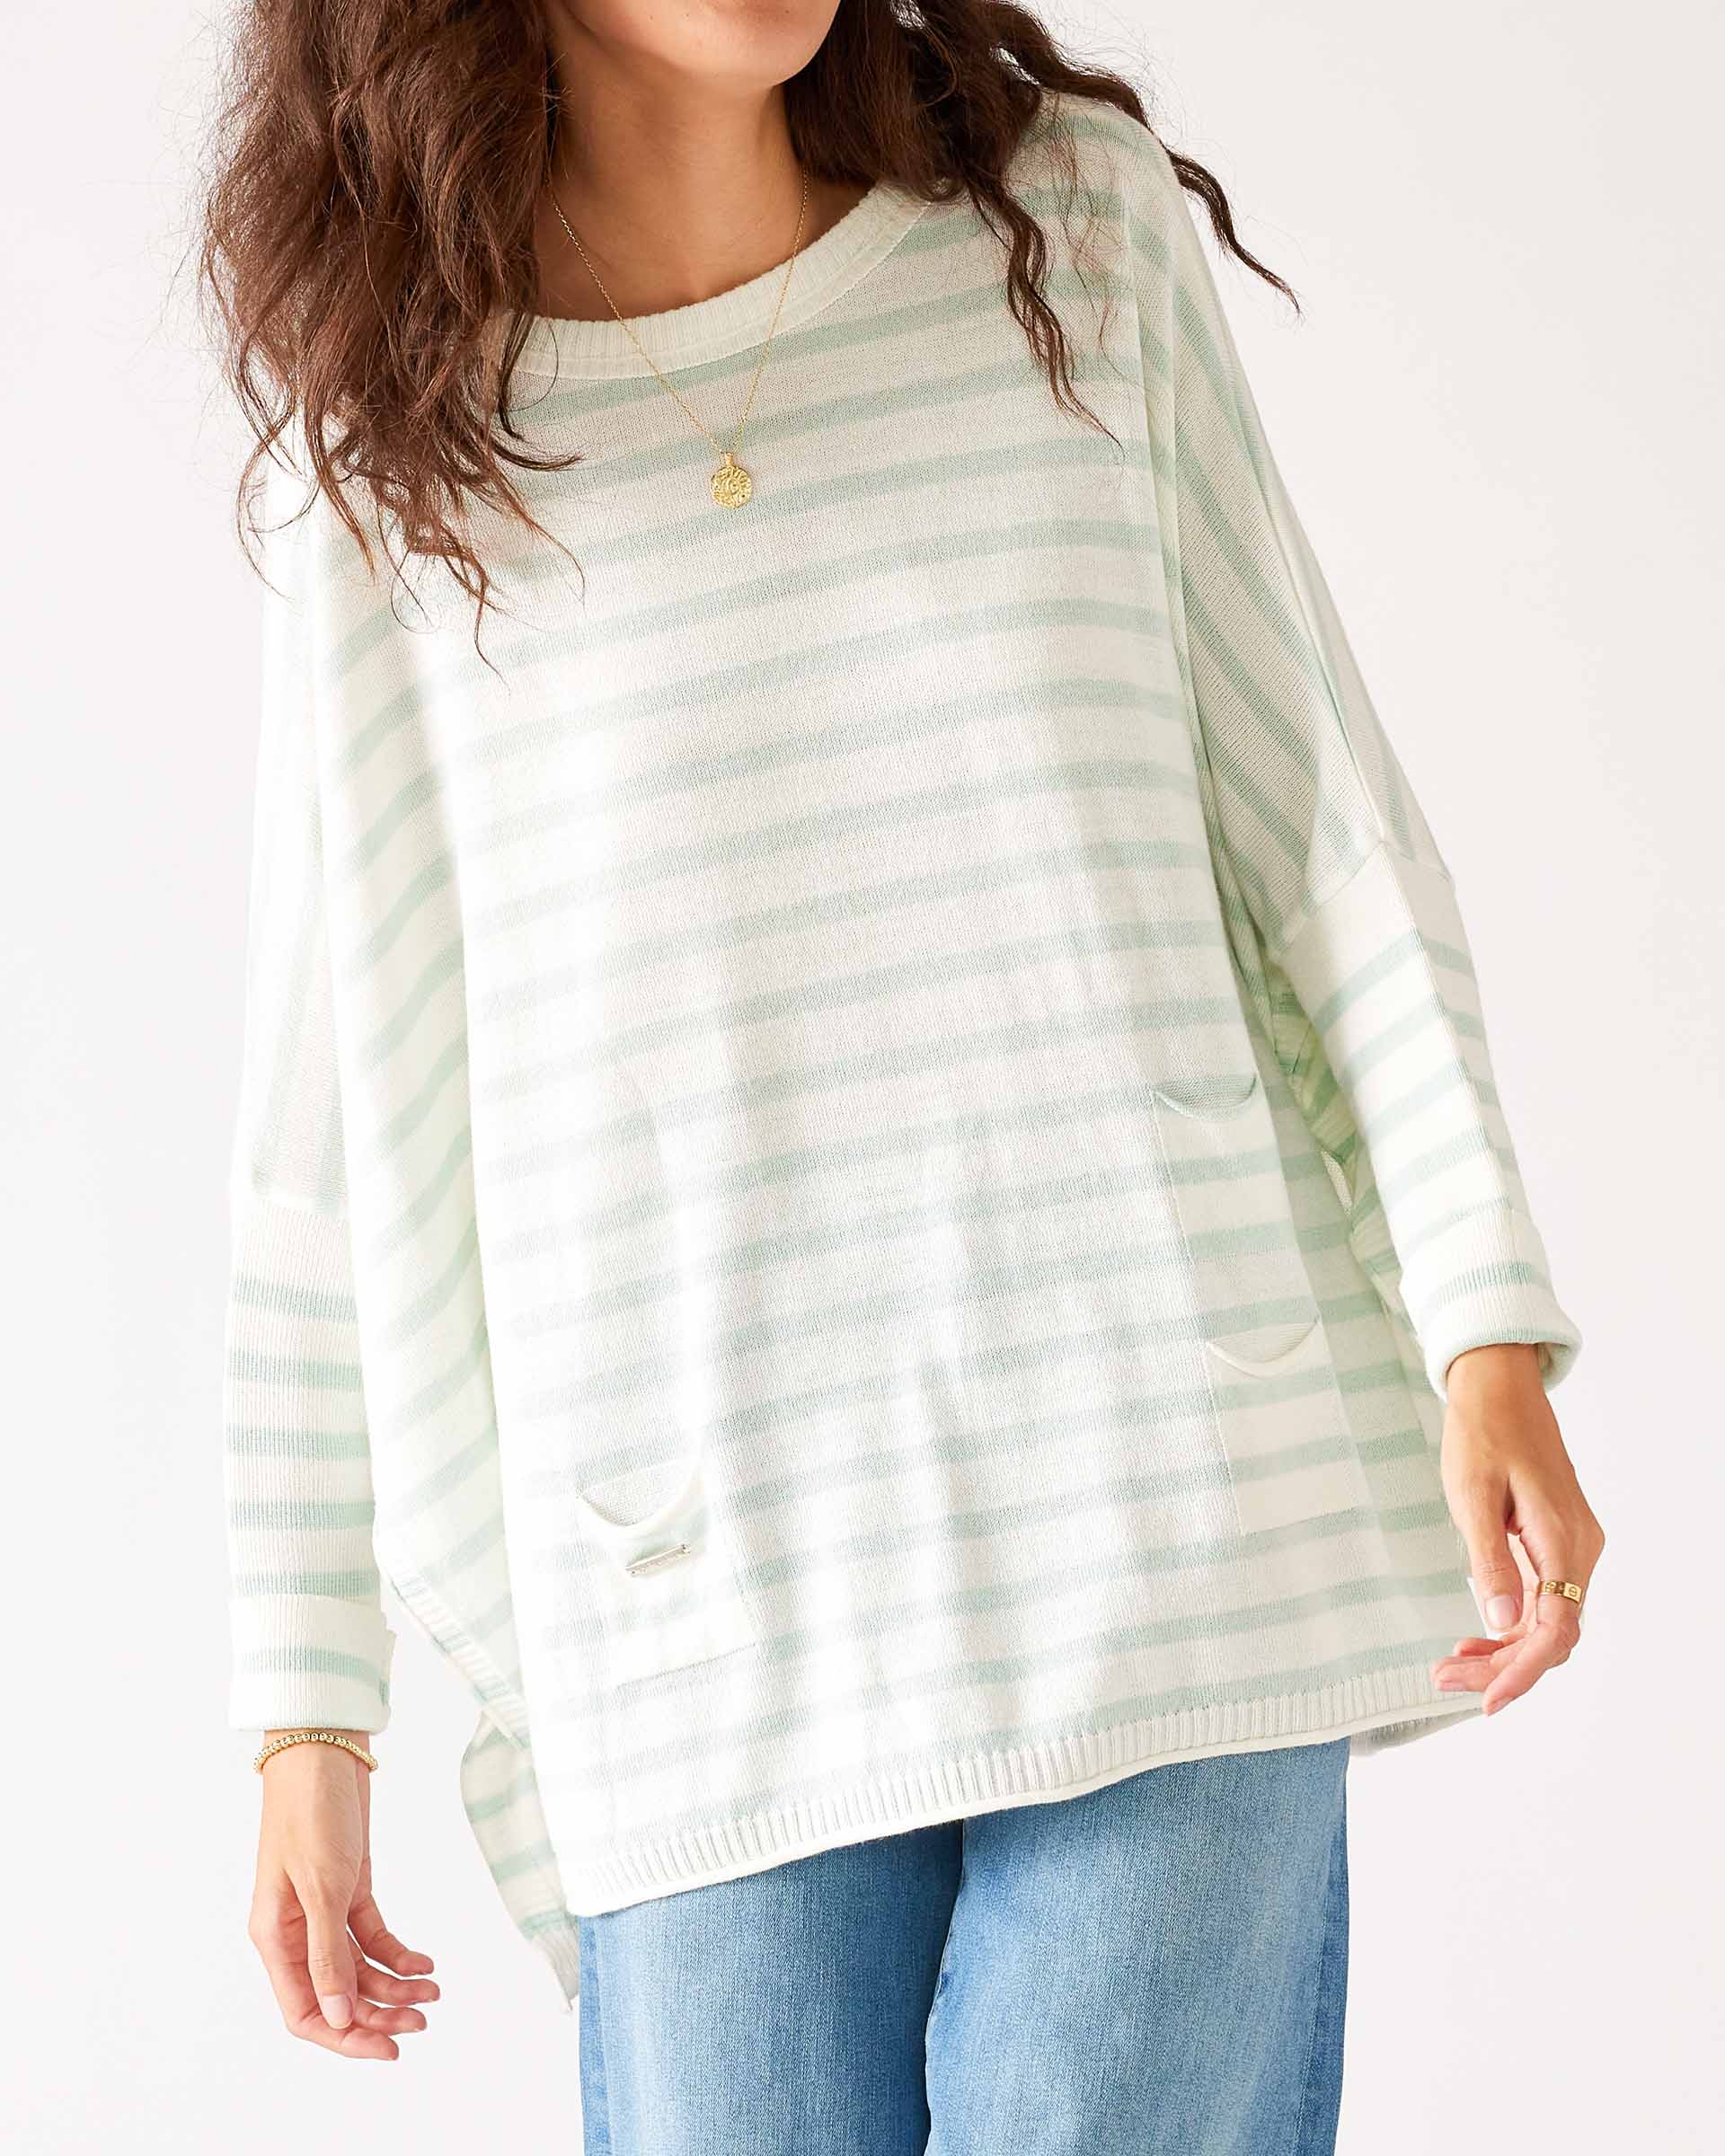 Women's Oversized Crewneck Knit Sweater in Green Stripes Chest View